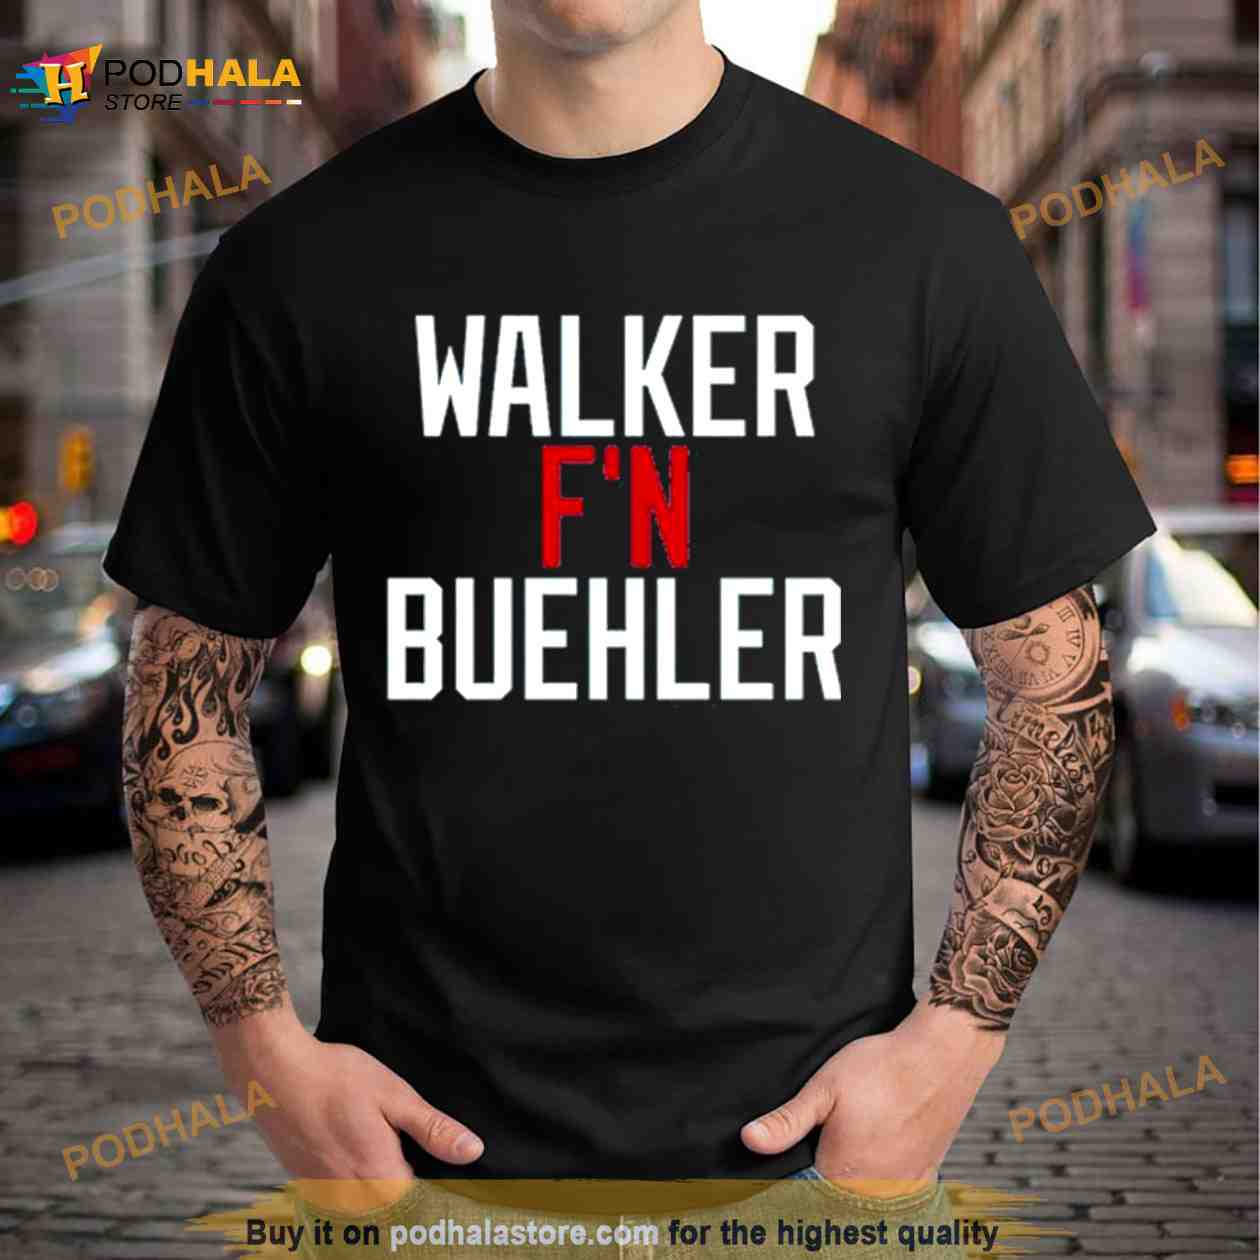 Walker F'n Buehler Shirt - Bring Your Ideas, Thoughts And Imaginations Into  Reality Today